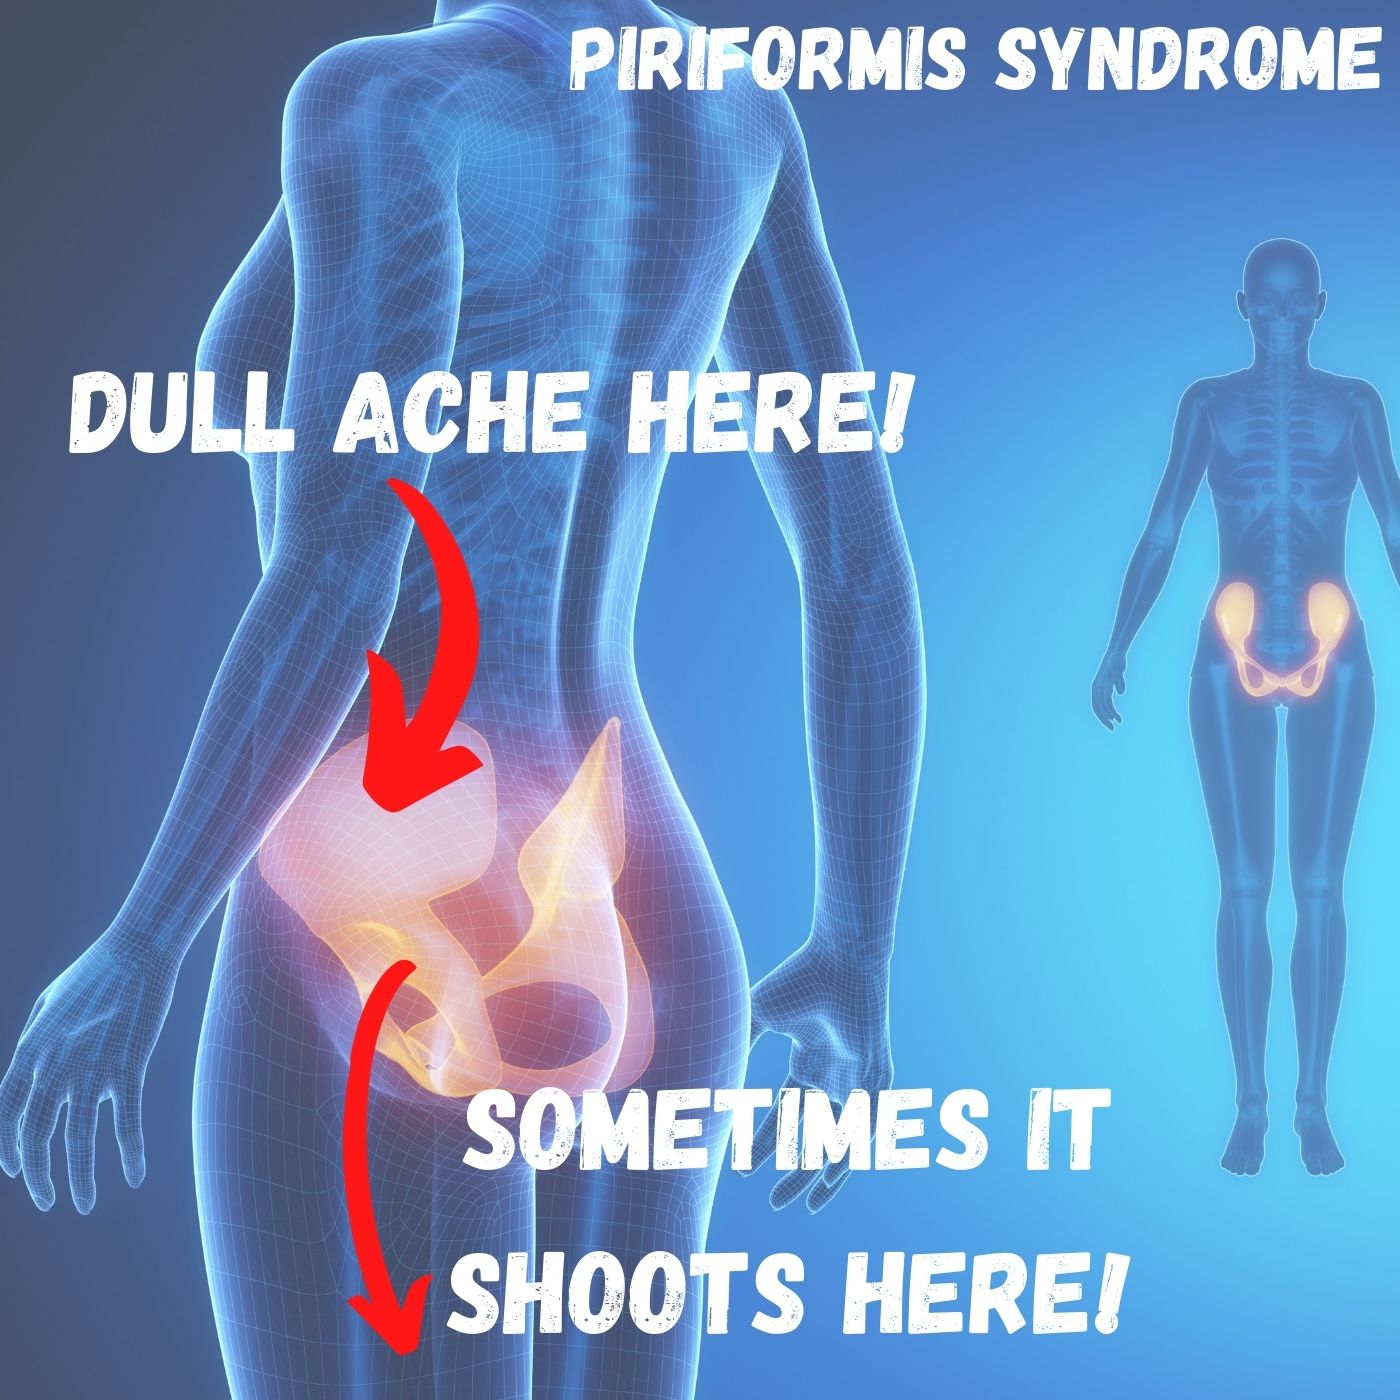 Piriformus Syndrome Information and Treatments